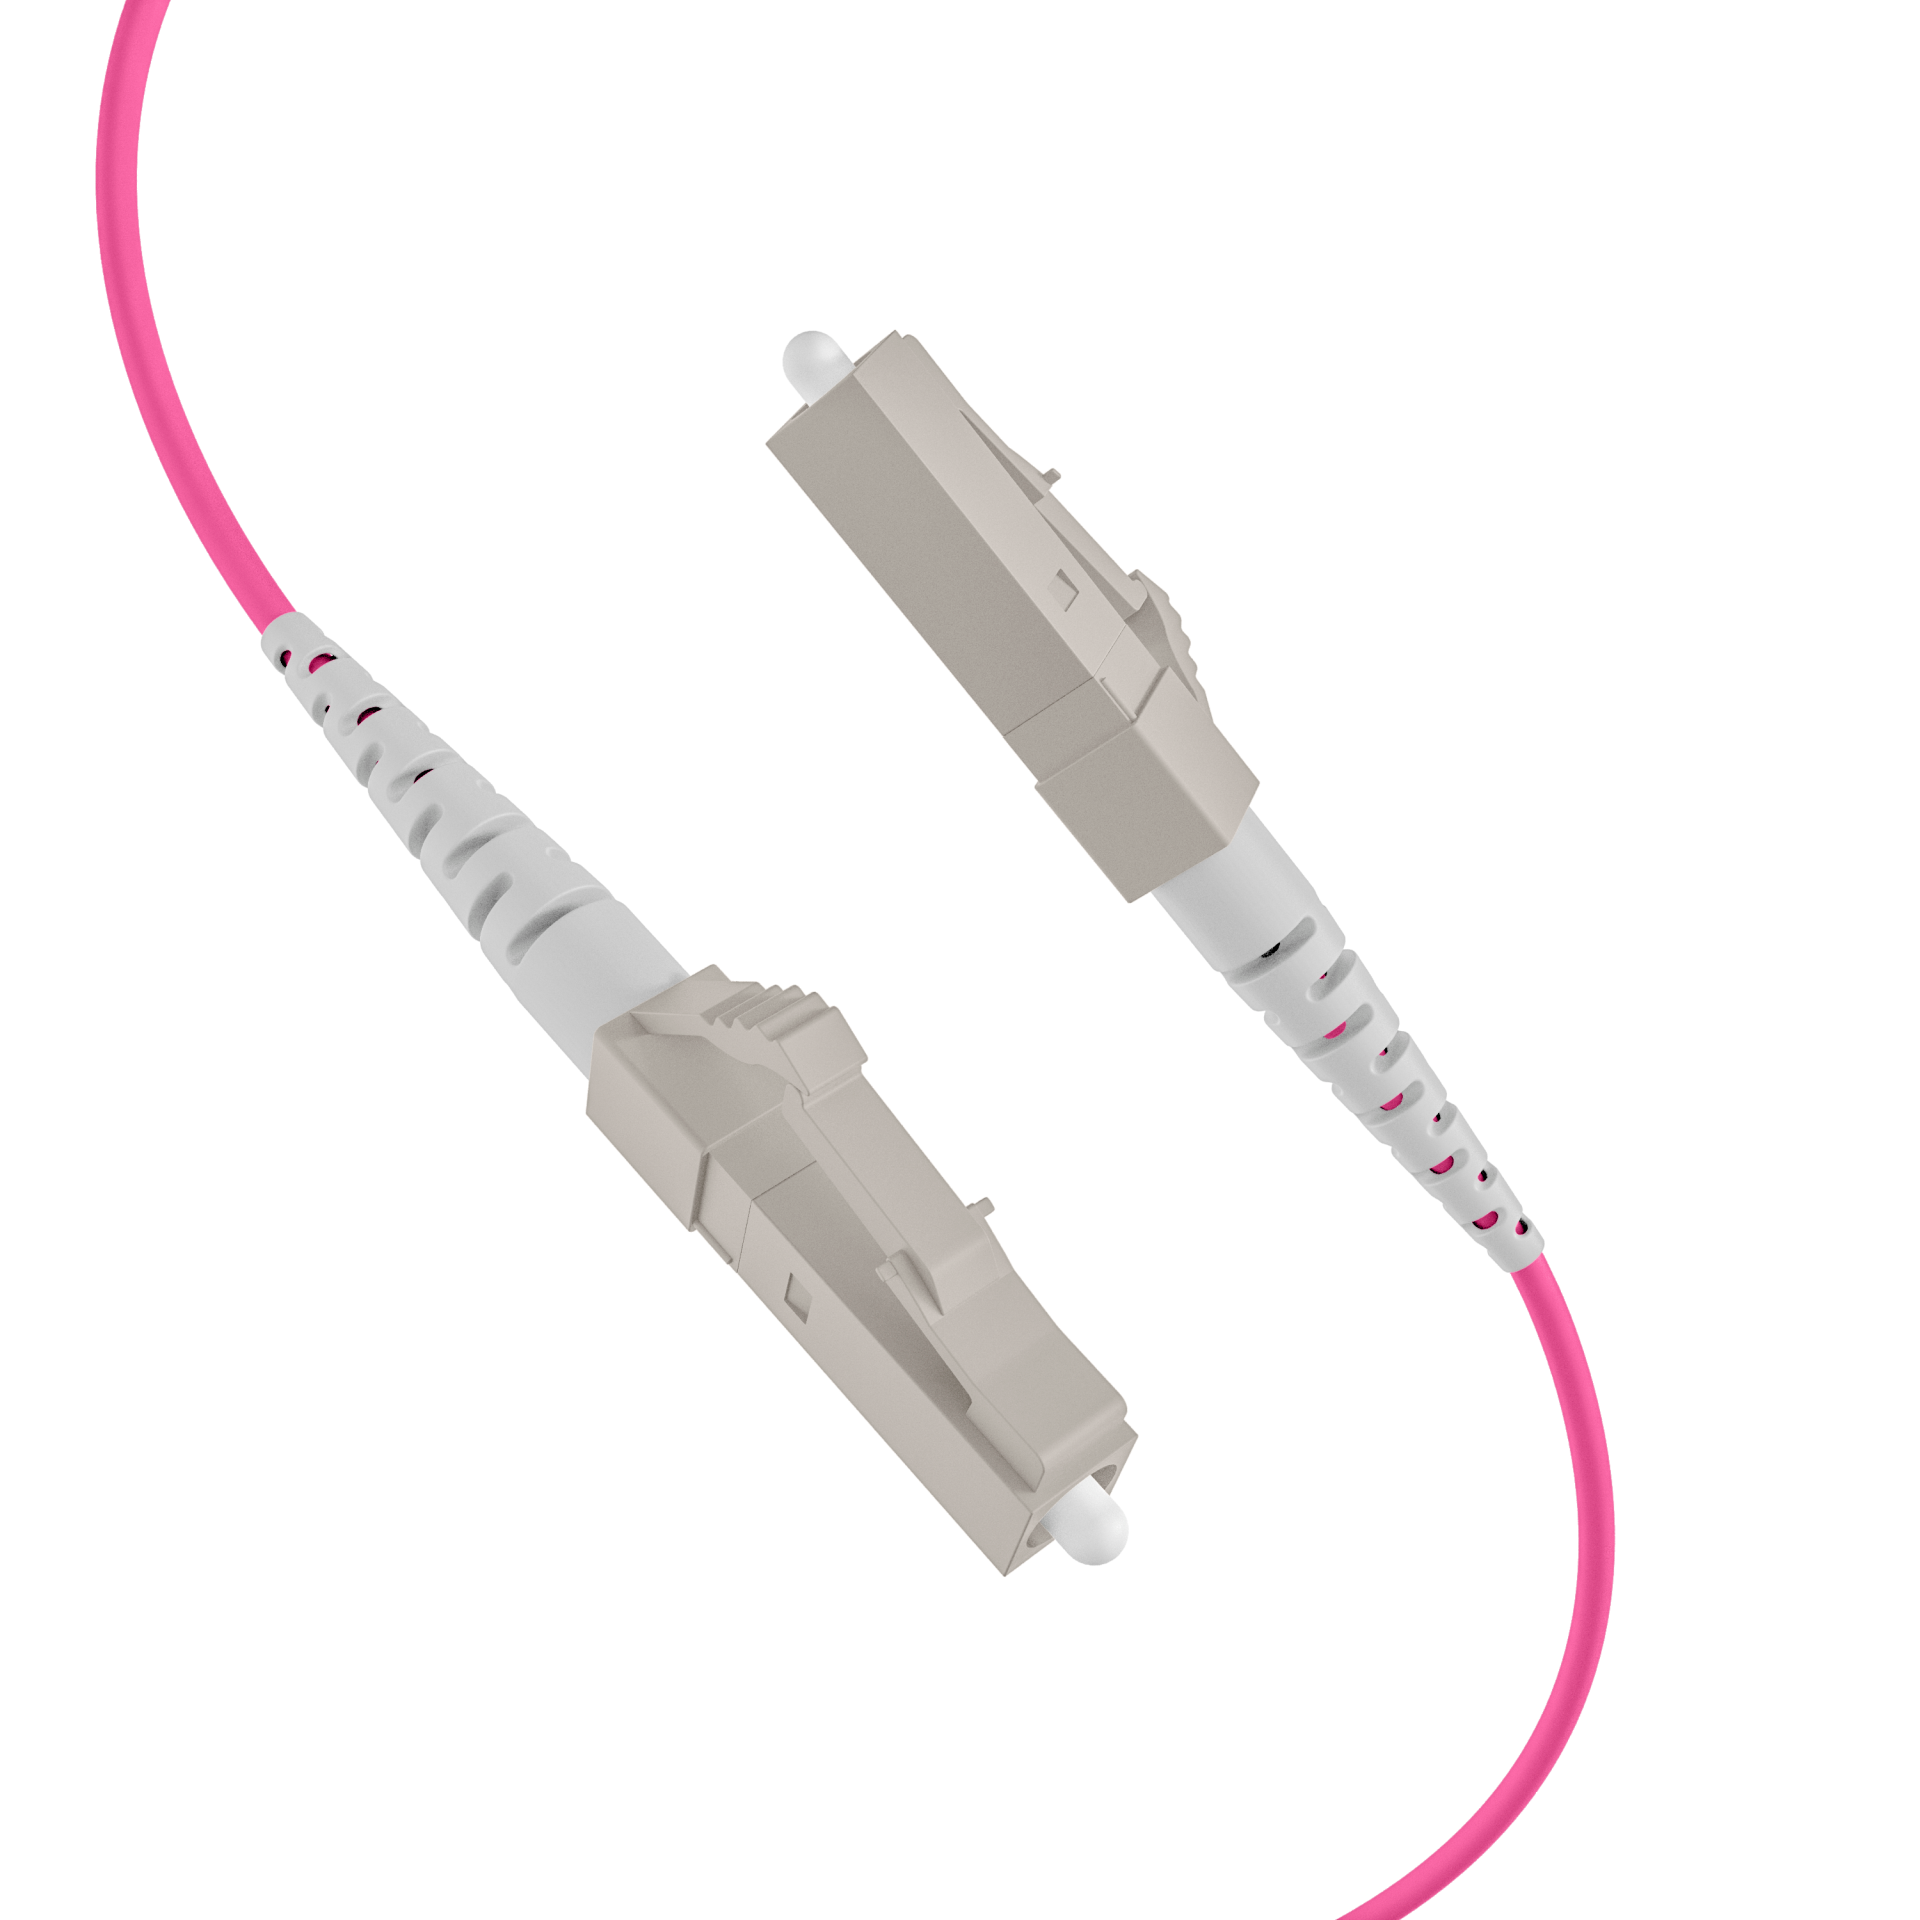 Trunkcable U-DQ(ZN)BH OM4 8G (1x8) LC-LC,60m Dca LSZH